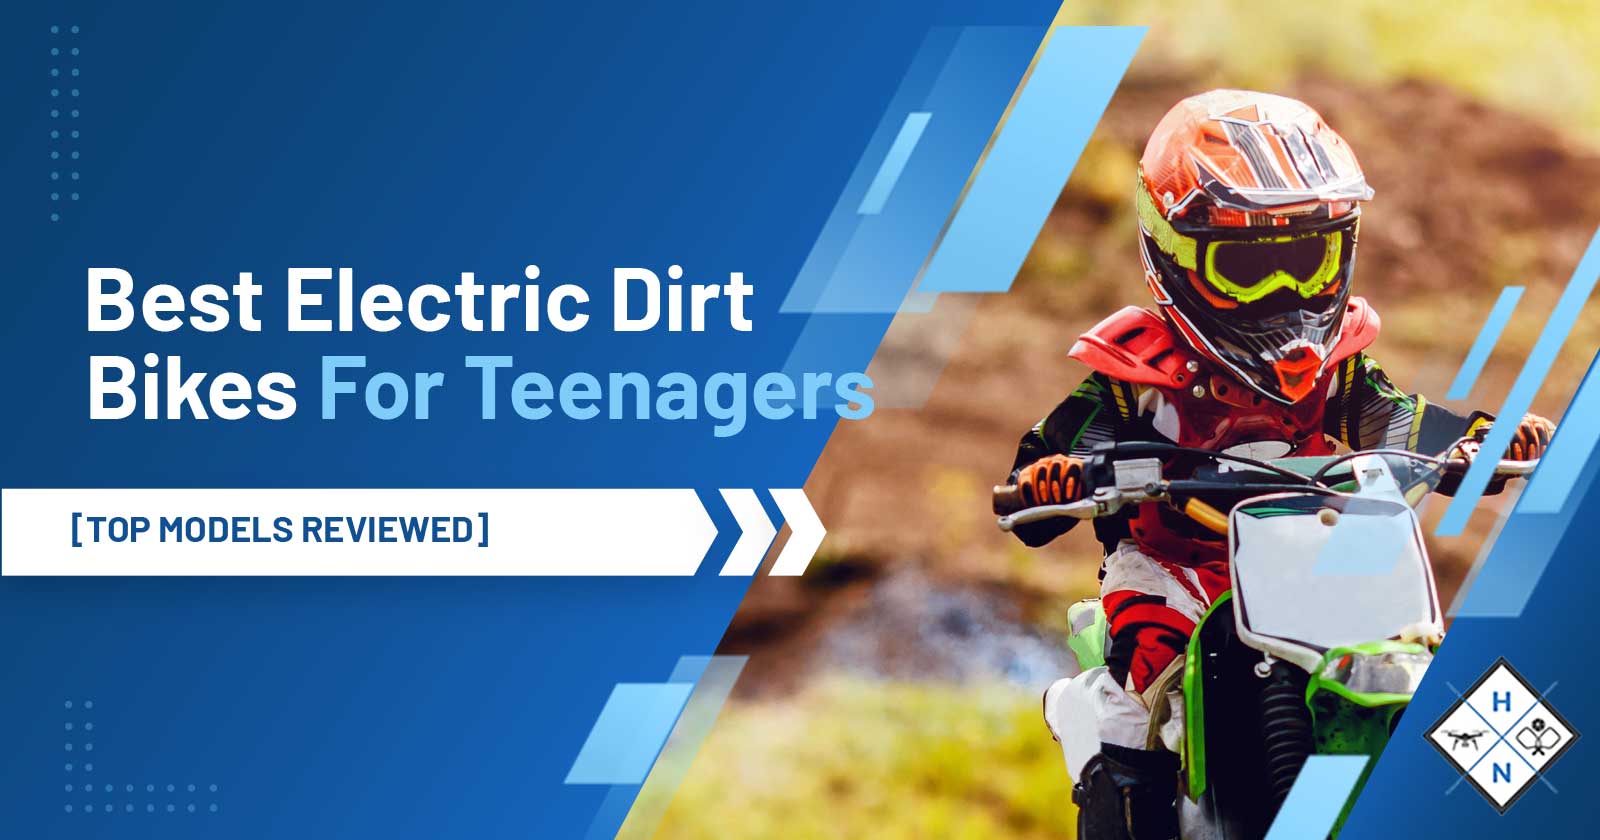 electric dirt bike for teenager